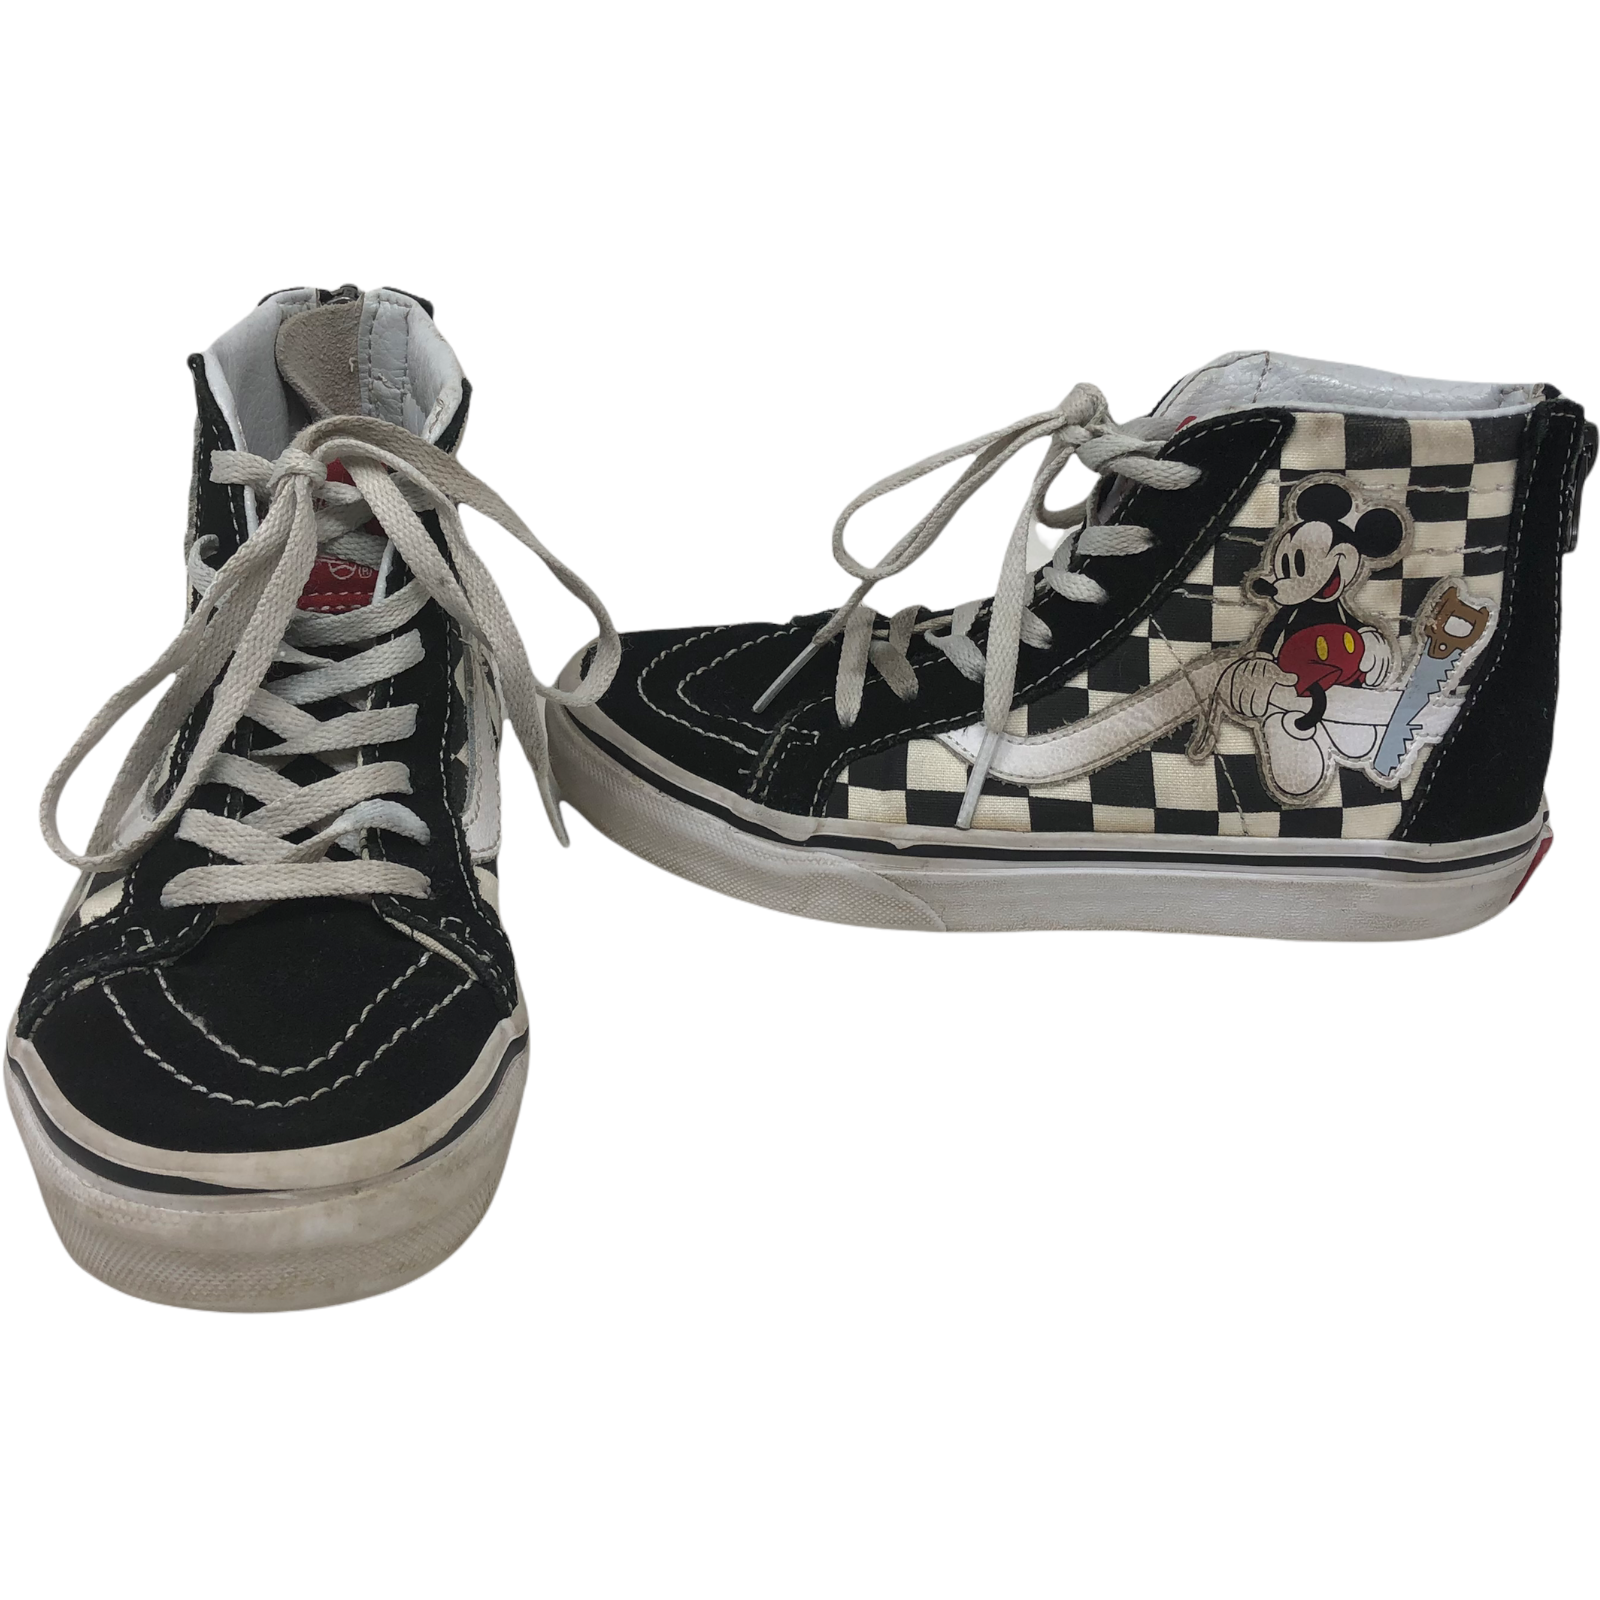 Disney Vans x Mickey Mouse Vans Off the Wall Youth Kids Sz 1 US Shoes Skate Saw - $39.59